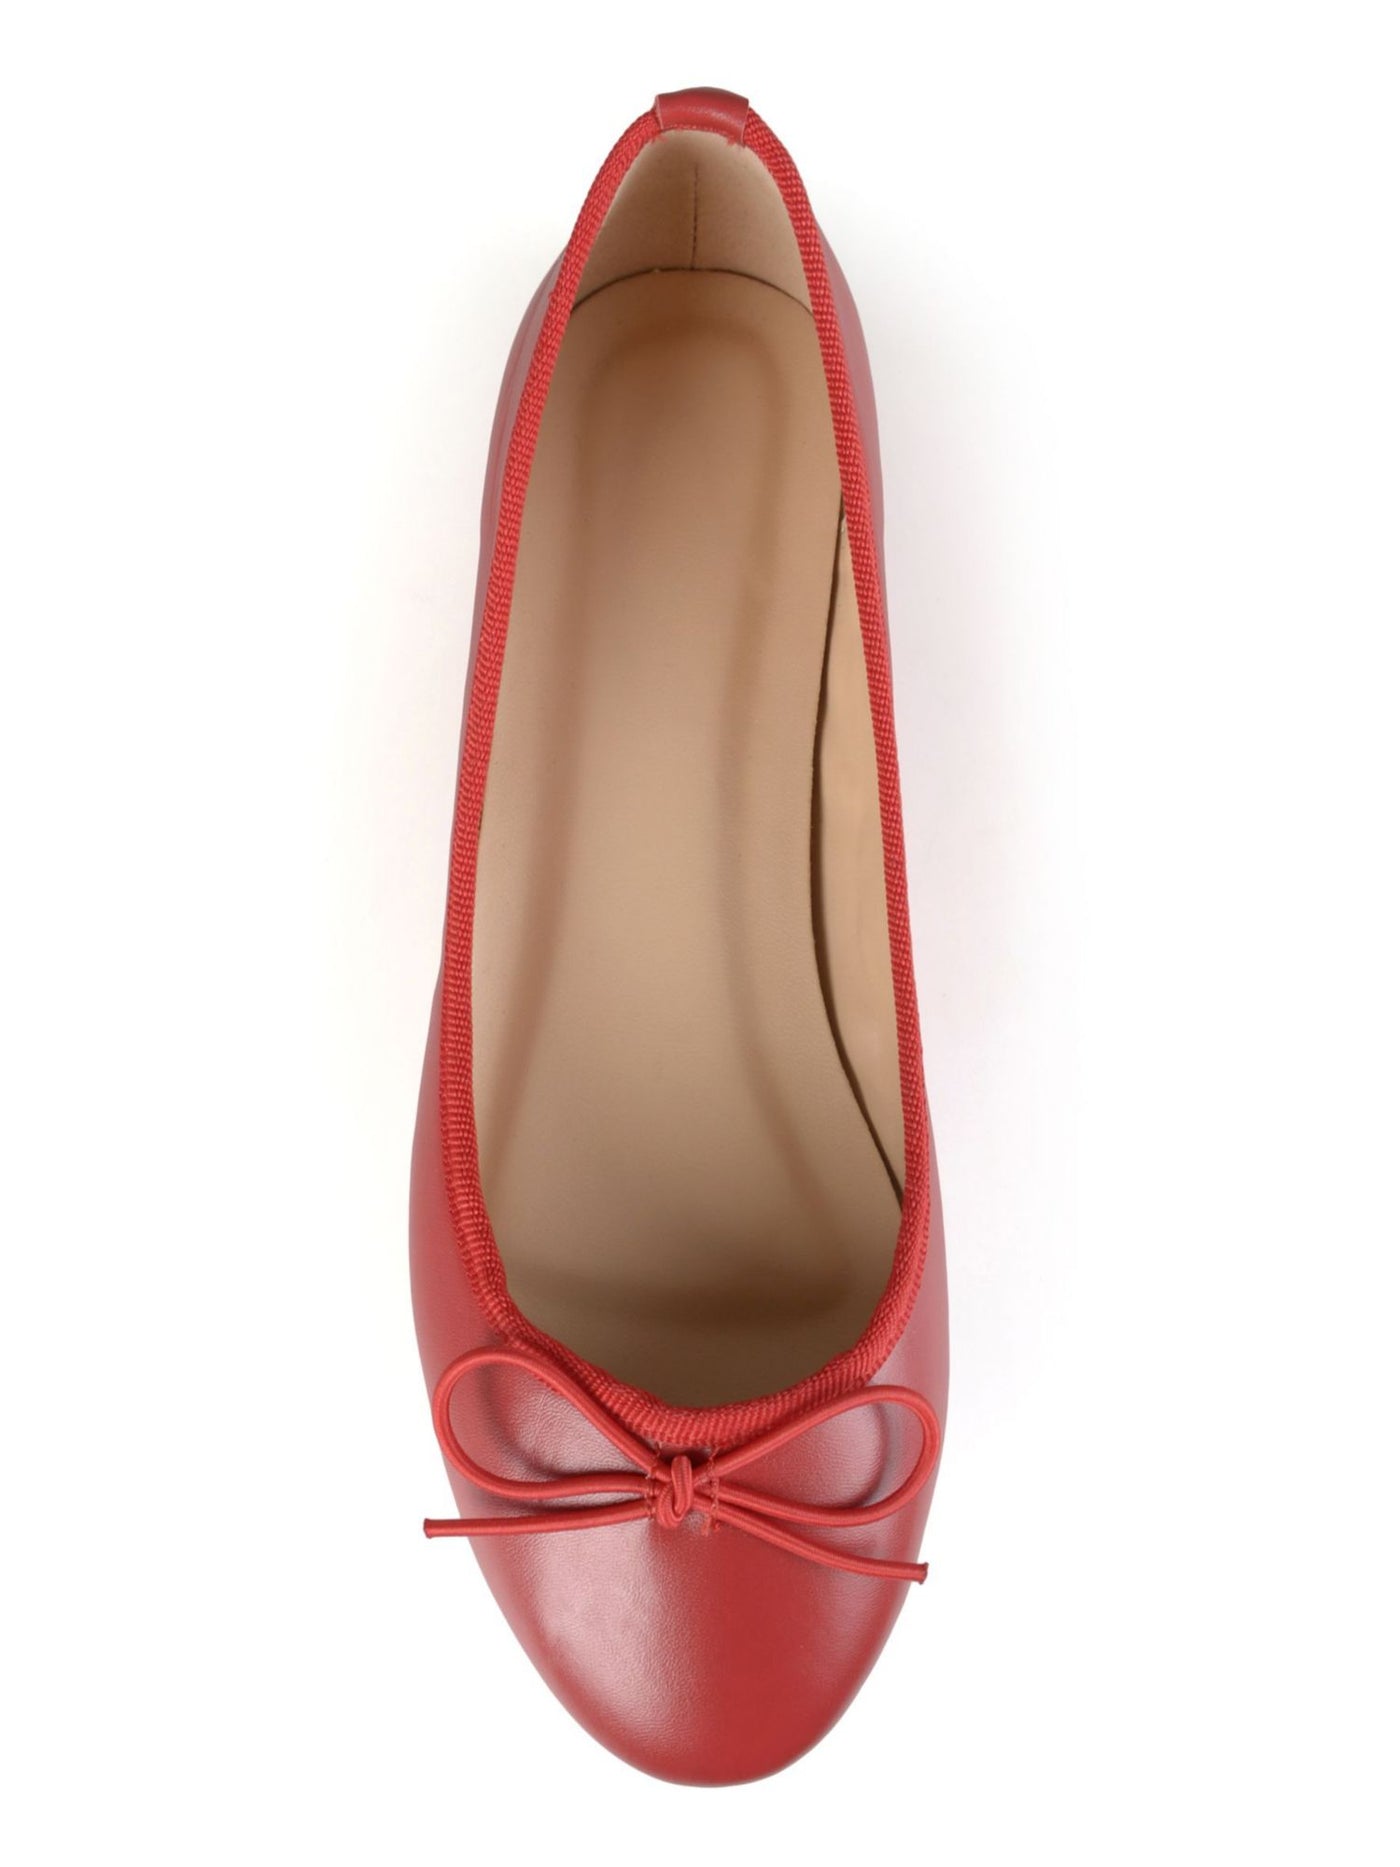 JOURNEE COLLECTION Womens Red Bow Accent Padded Vika Round Toe Slip On Ballet Flats 6 M